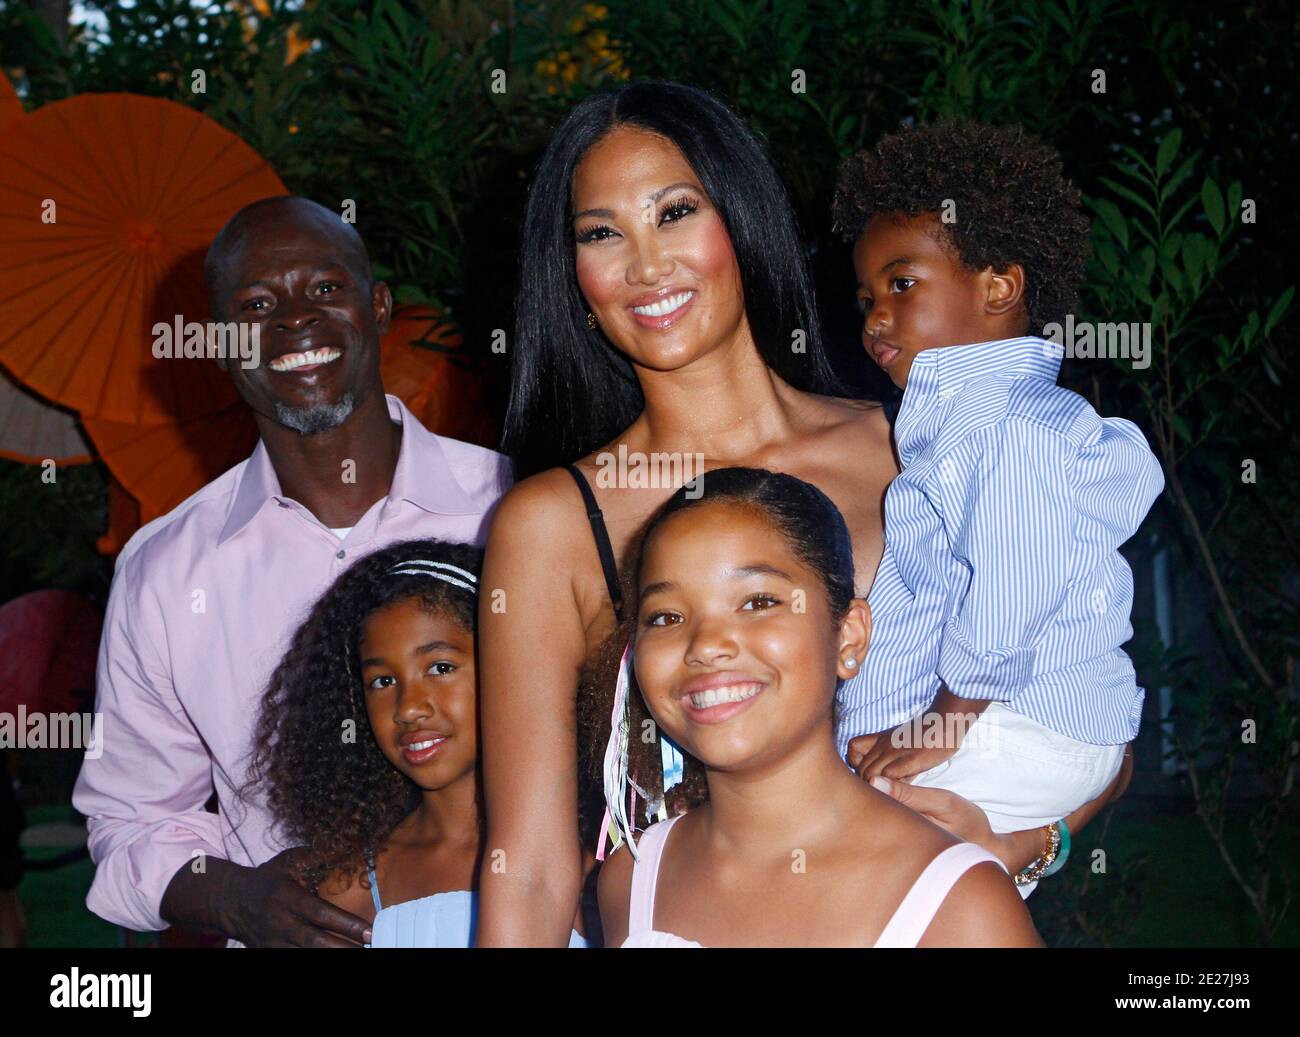 Djimon Honsou, Aoki Lee Simmons, Kimora Lee Honsou, Kenzo Honsou and Ming Lee Simmons attend the 12th Annual Art For Life Event at Russell Simmons's private estate in East Hampton, NY, USA, on July 30, 2011. Photo by Donna Ward/ABACAPRESS.COM Stock Photo